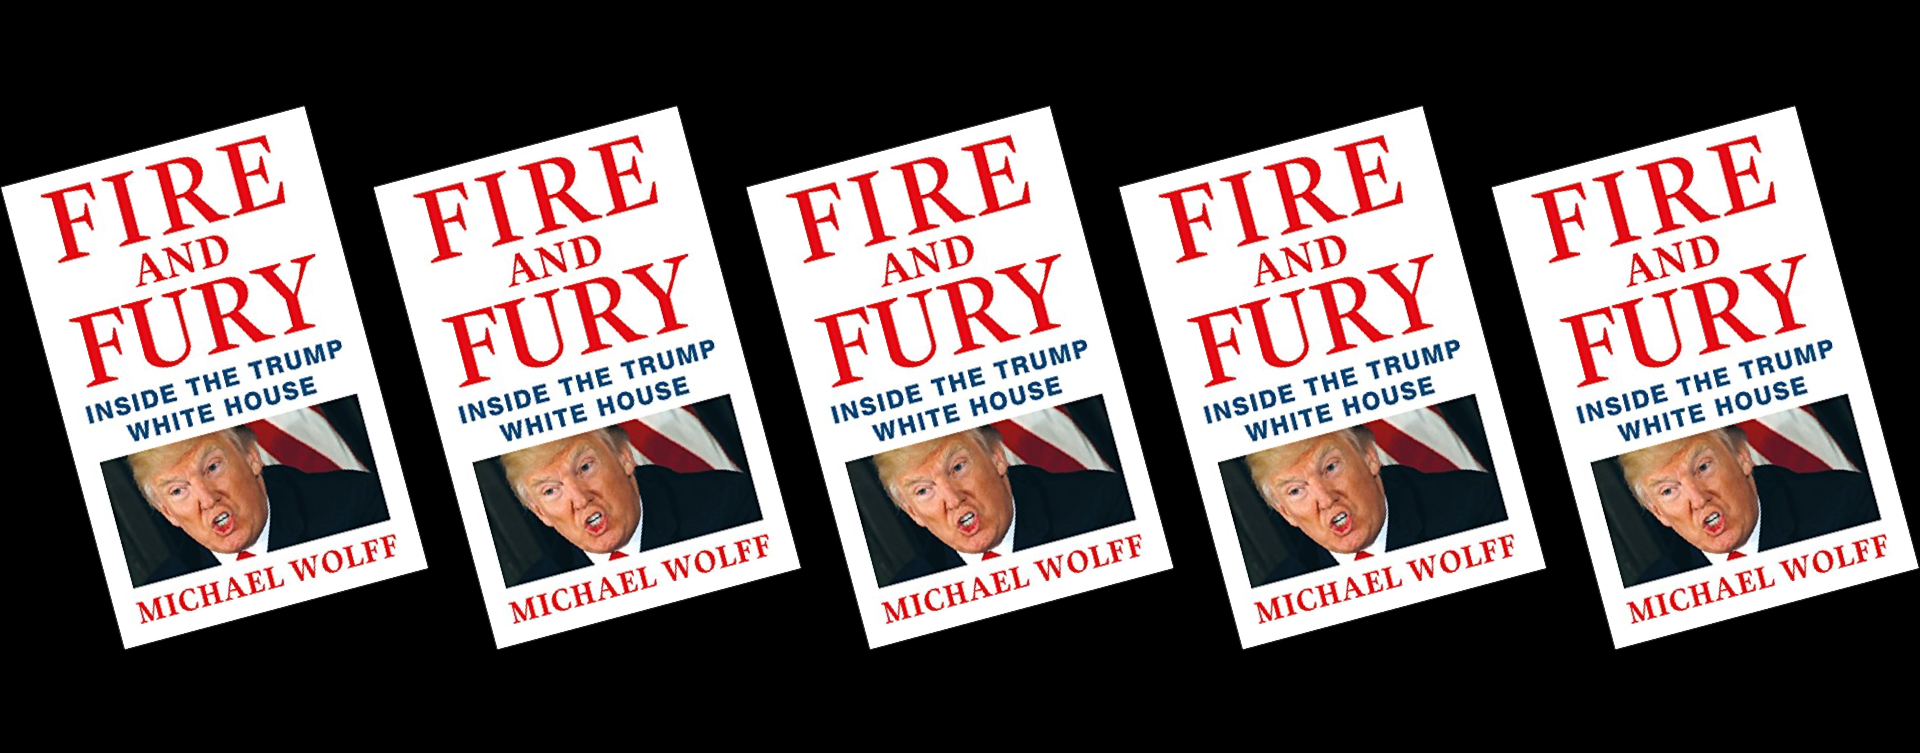 Fire and fury by michael wolff